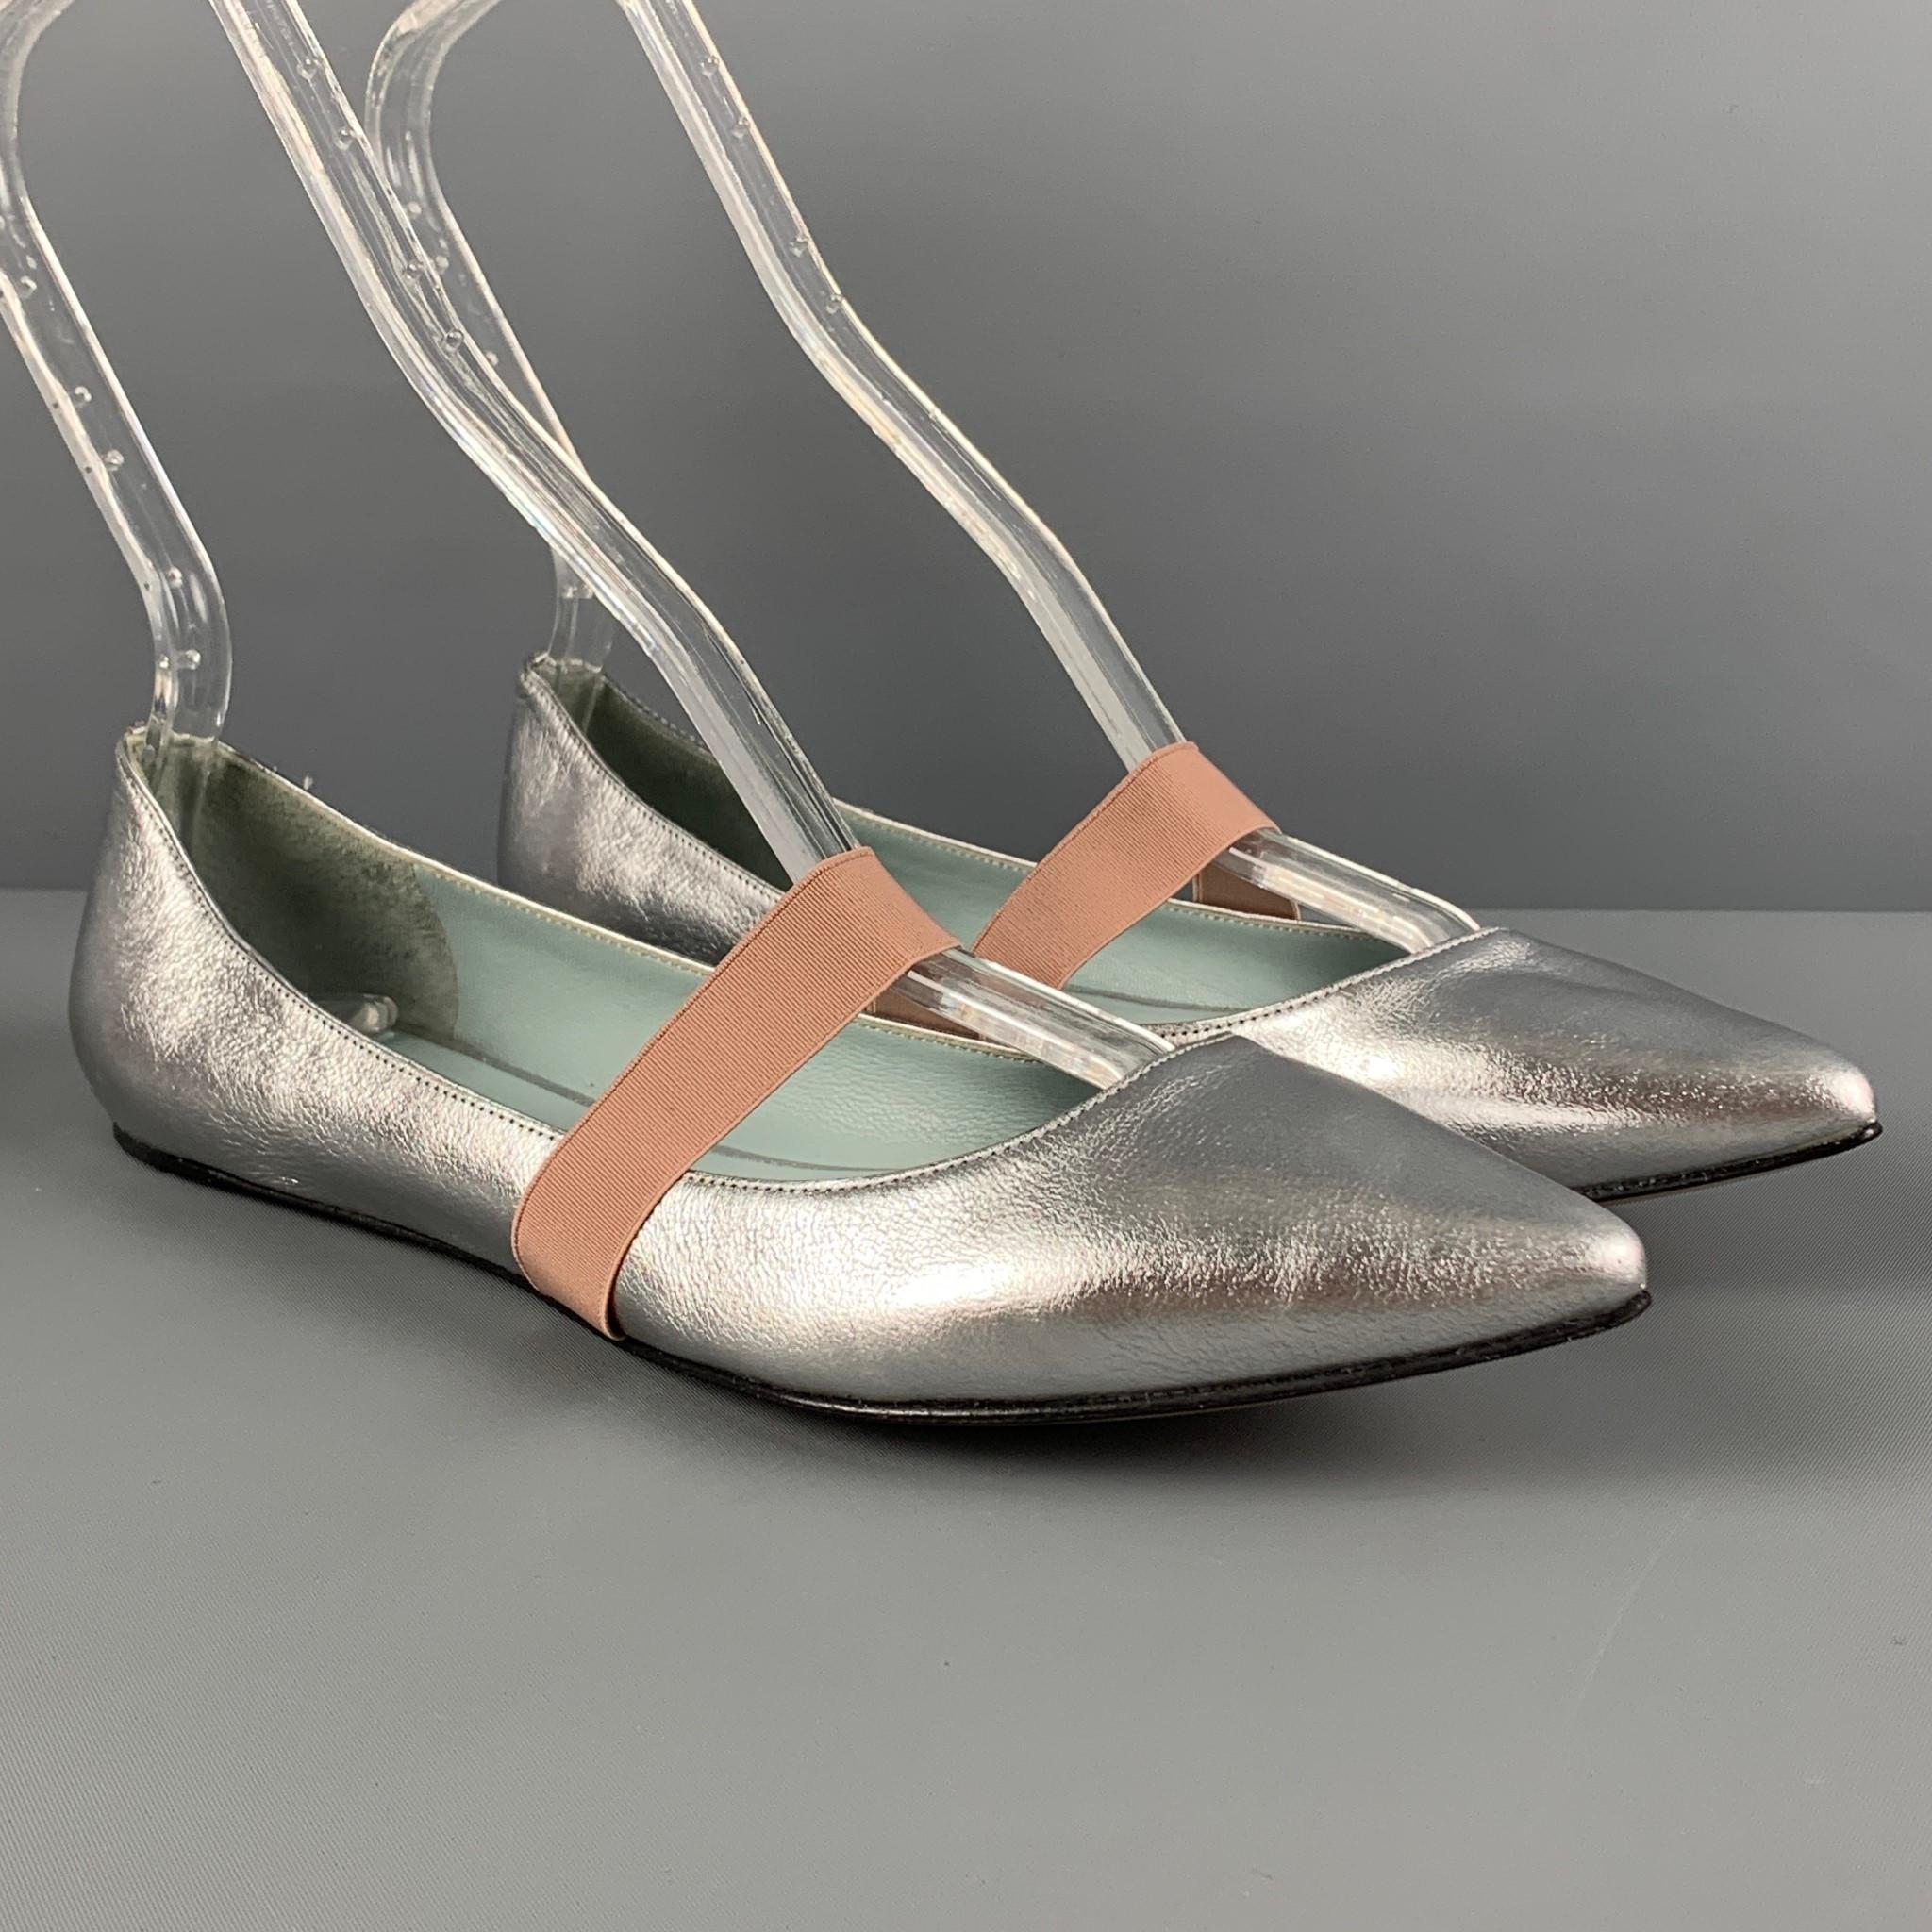 MARC JACOBS flats comes in a silver leather featuring a mary jane style, elastic strap, and a pointed toe. 

Very Good Pre-Owned Condition.
Marked: 38.5
Original Retail Price: $295.00

Outsole: 10.5 in. x 3.25 in.

 